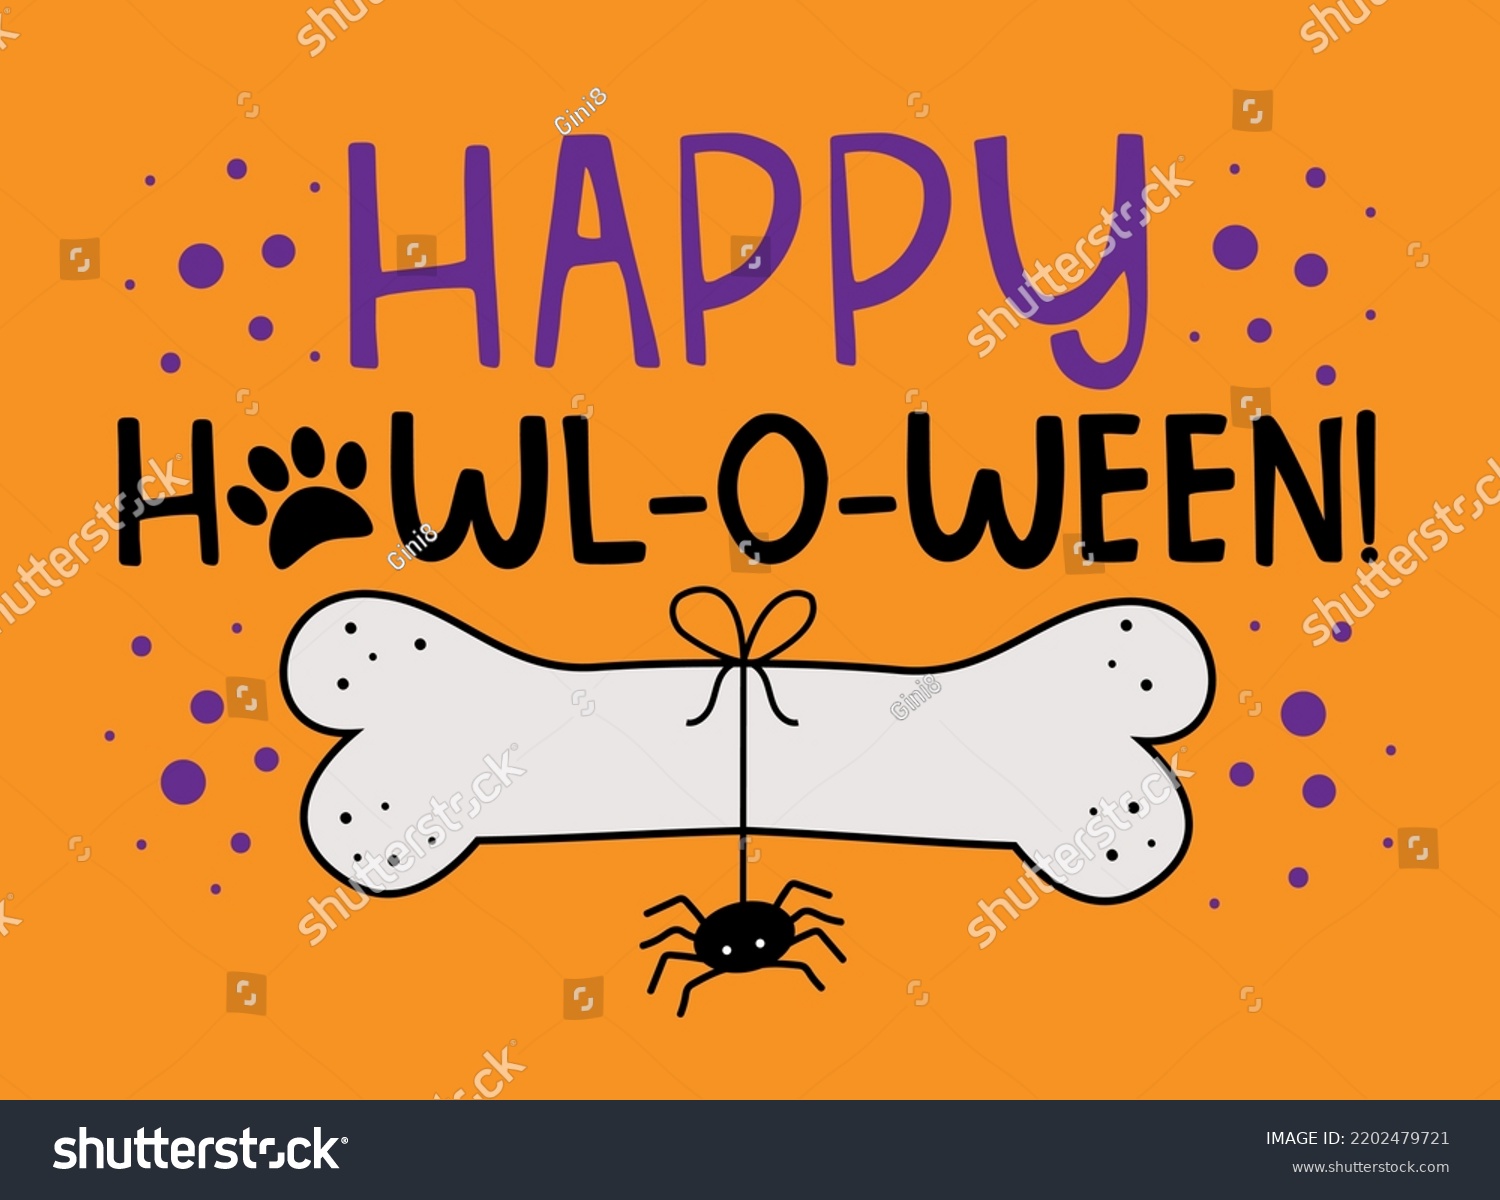 SVG of Happy Howl-o-ween!- funny saying with dog bone and spider isolated on orange color backgound. Good for dog clothes, greeting card, T shirt print, label, and other decoration for Halloween. svg